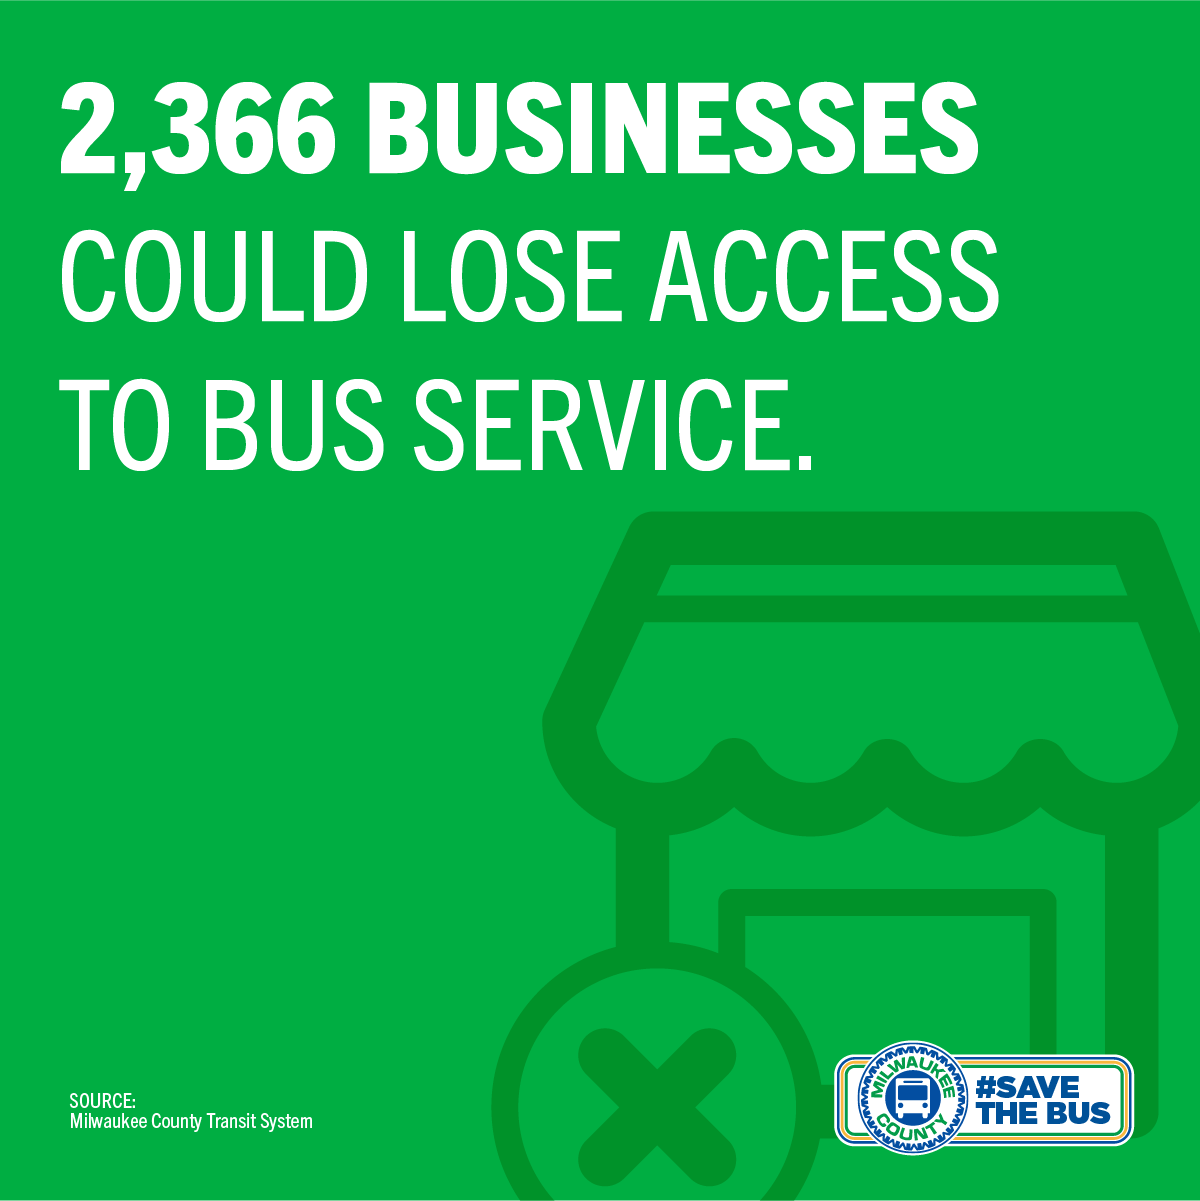 2,366 businesses could lose access to bus service.